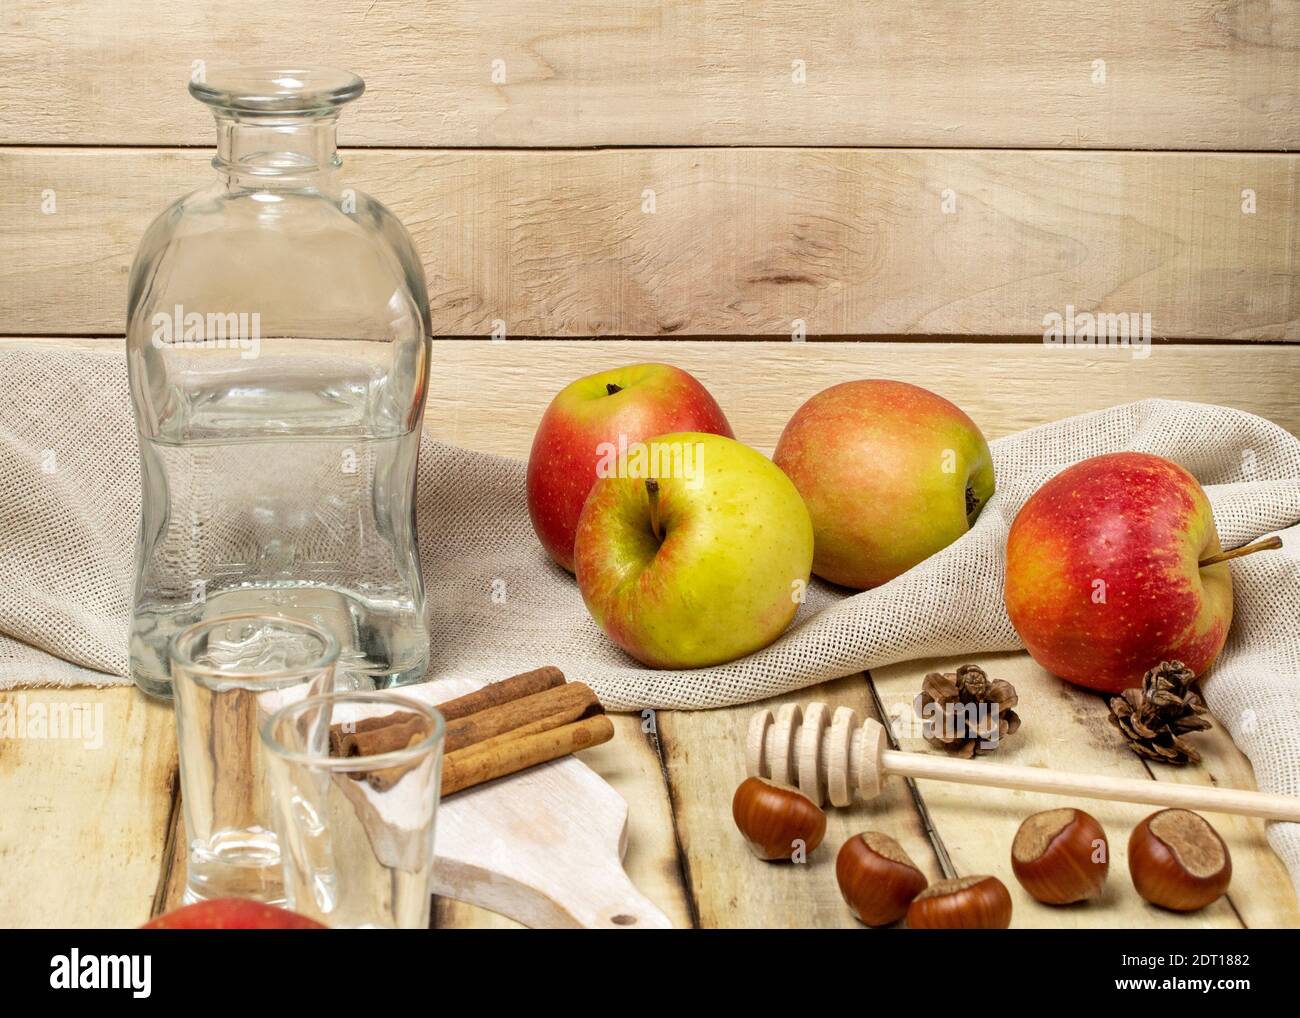 Natural homemade vodka made from apples and sugar. Homemade apple vodka grown in the garden Stock Photo